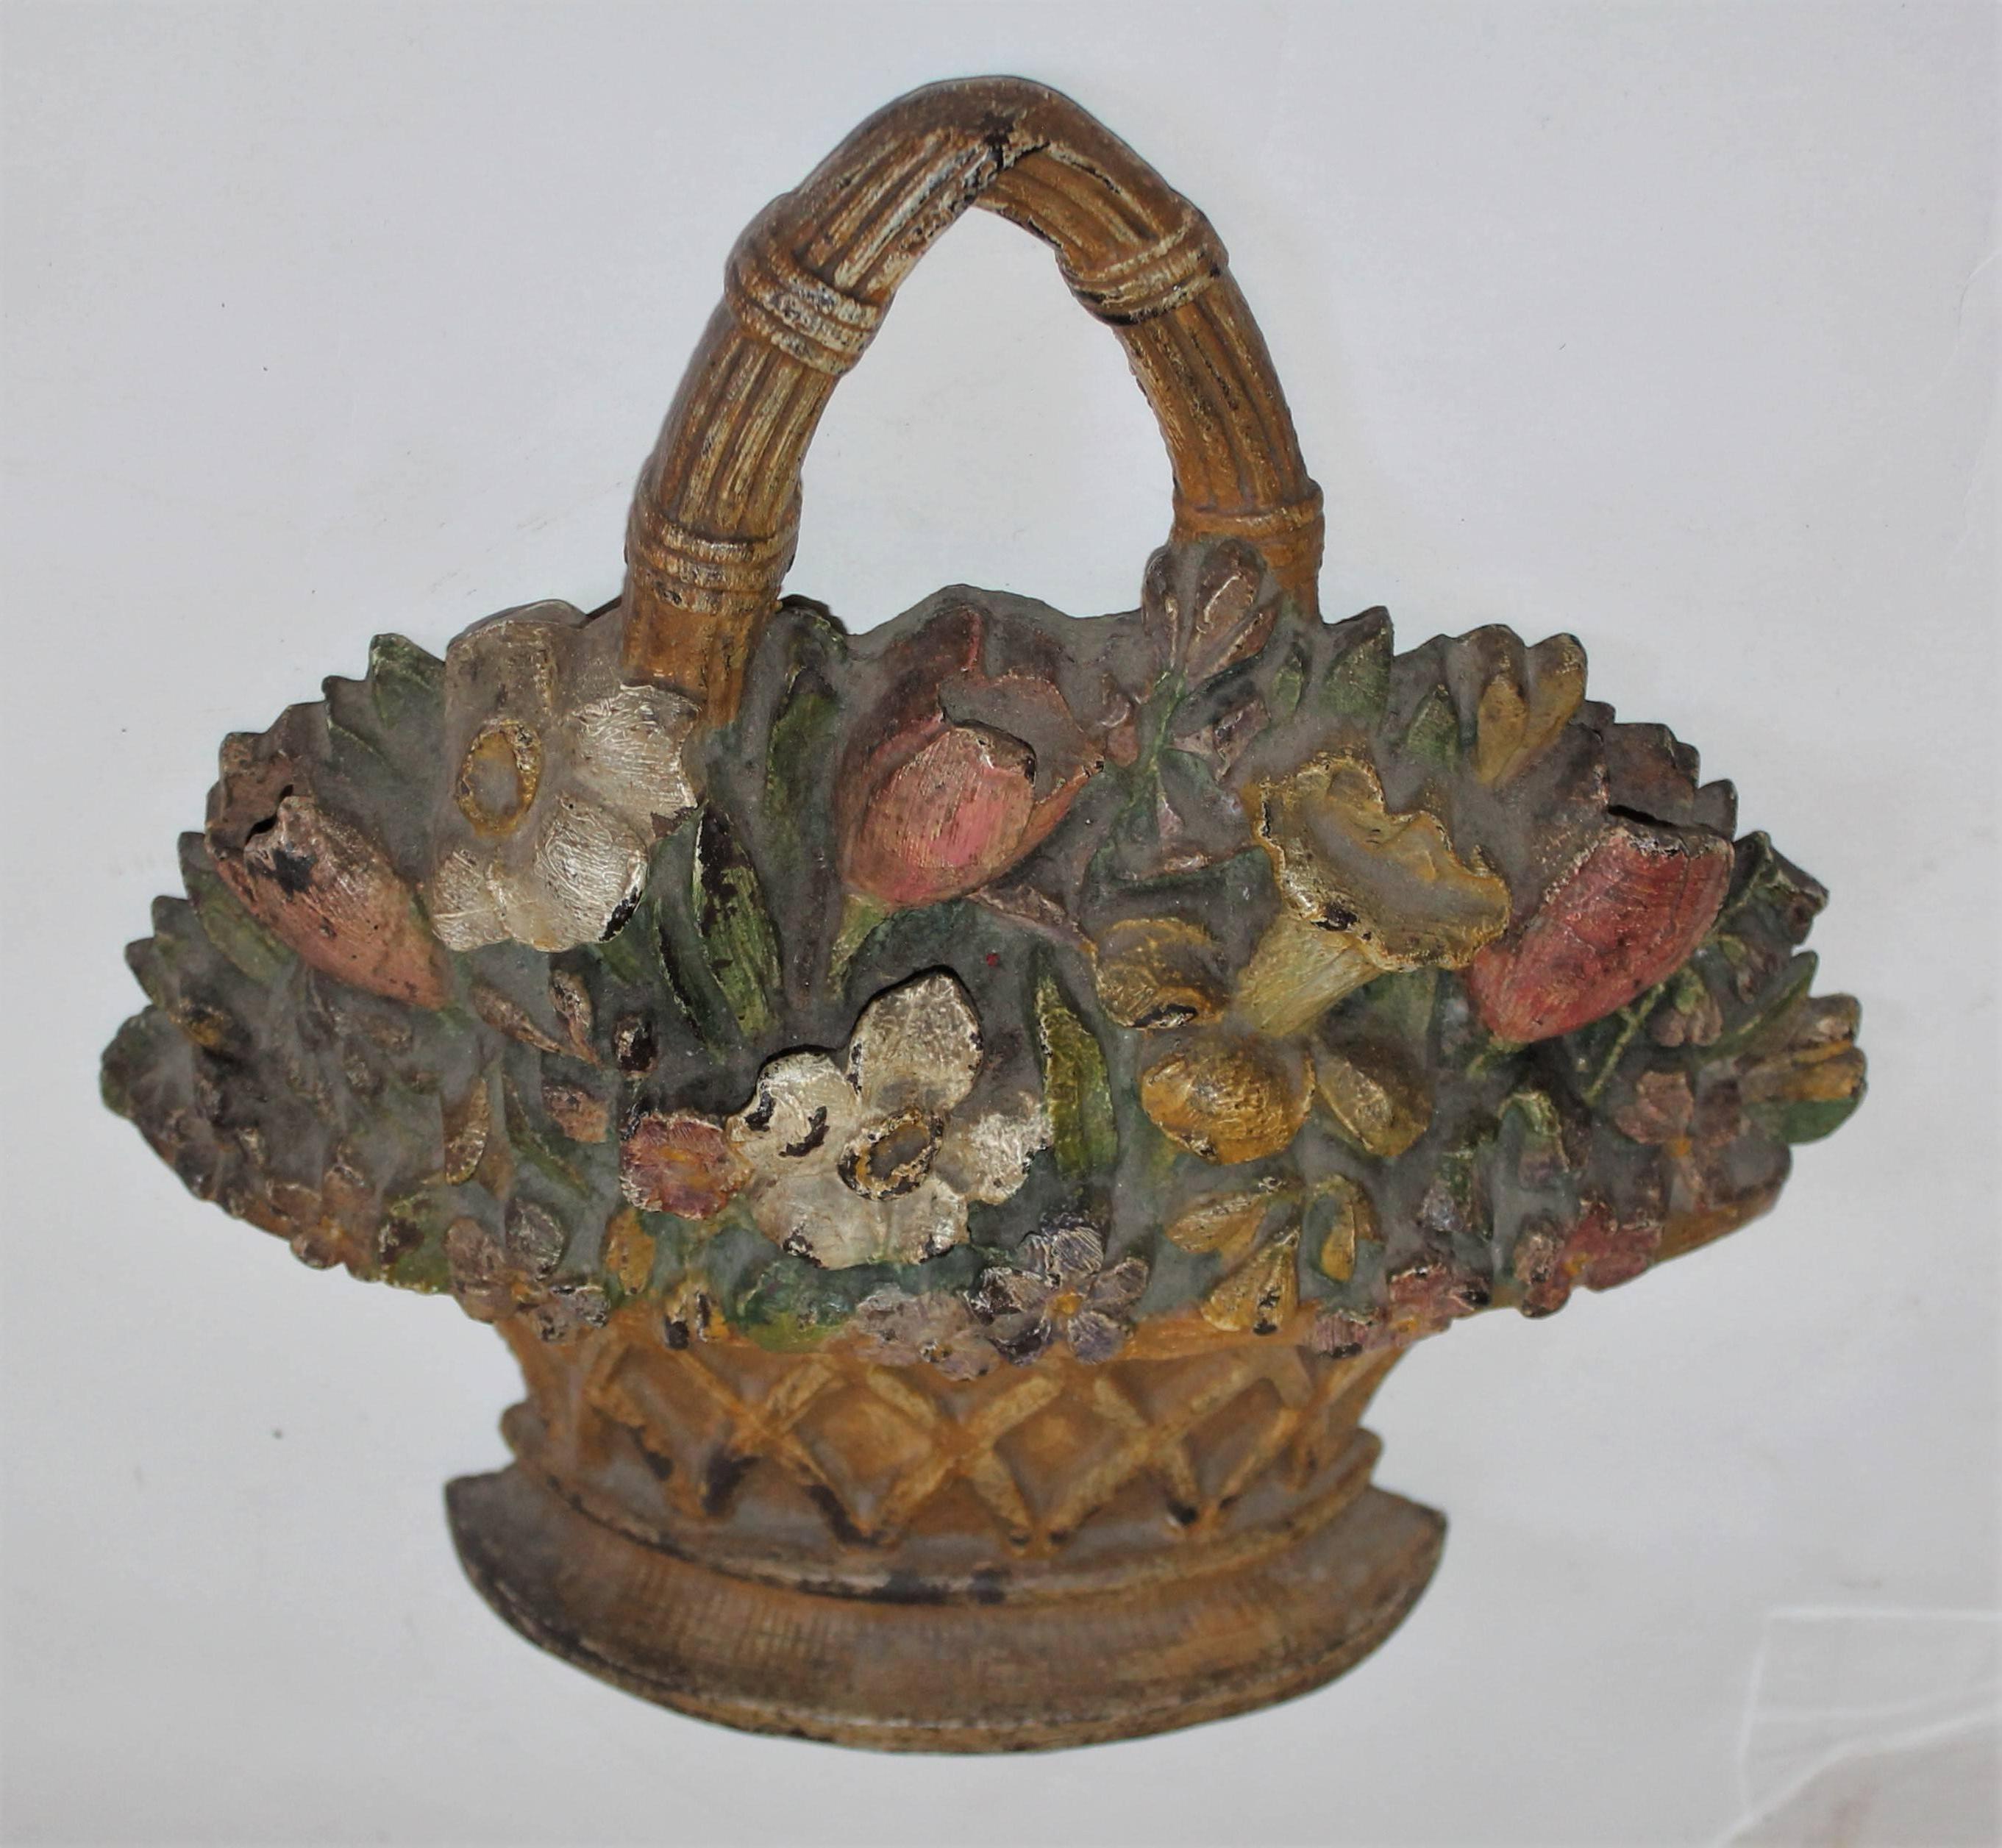 19th century original painted Hubley cast iron doorstop is in fine condition and has a great patina. This is a large floral doorstop with heavy weight.